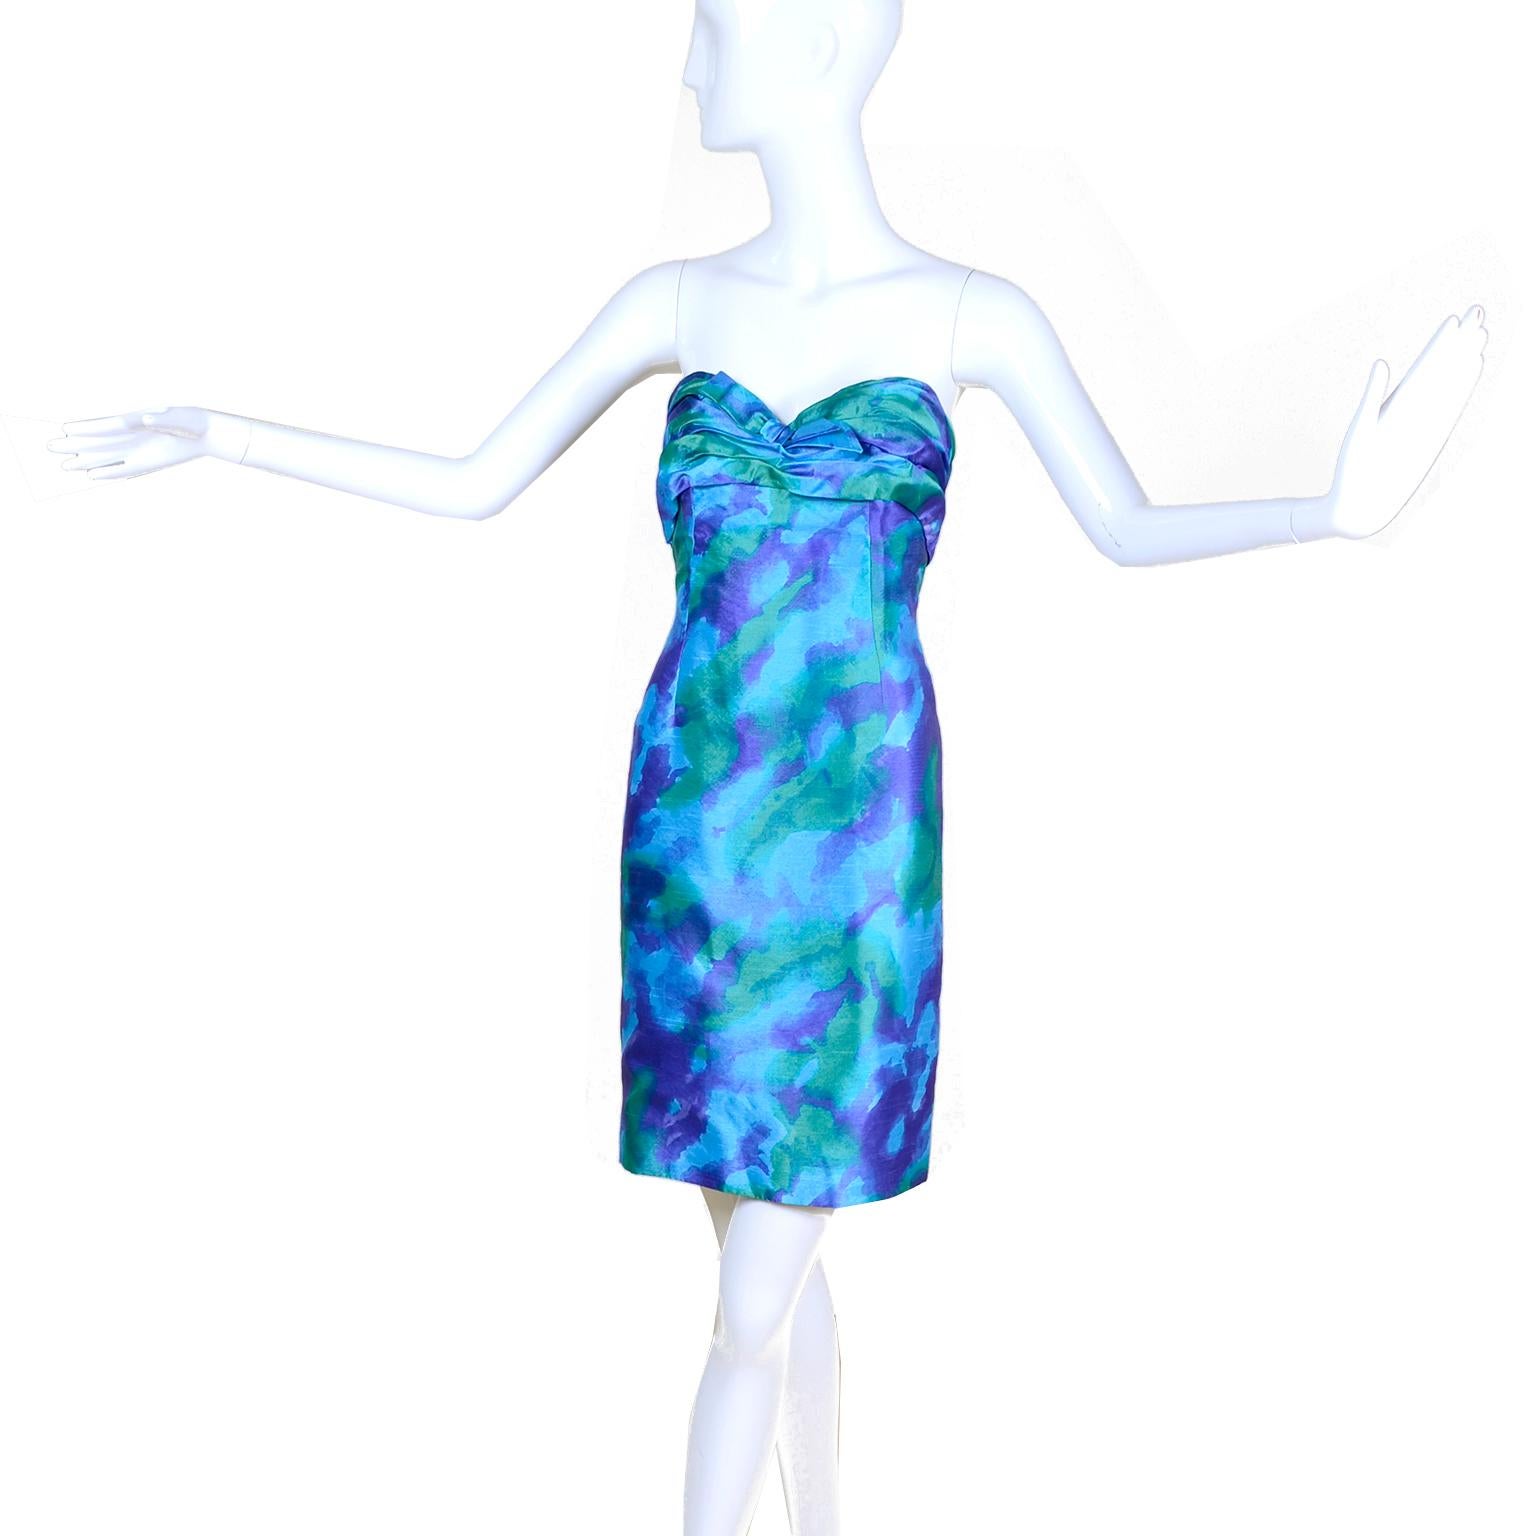 This beautiful Loris Azzaro Paris vintage watercolor silk strapless cocktail or party dress was made in France in the 1980's. This stunning dress is in rich saturated shades of blue, deep purple and green. The bodice has a built in bra and the dress